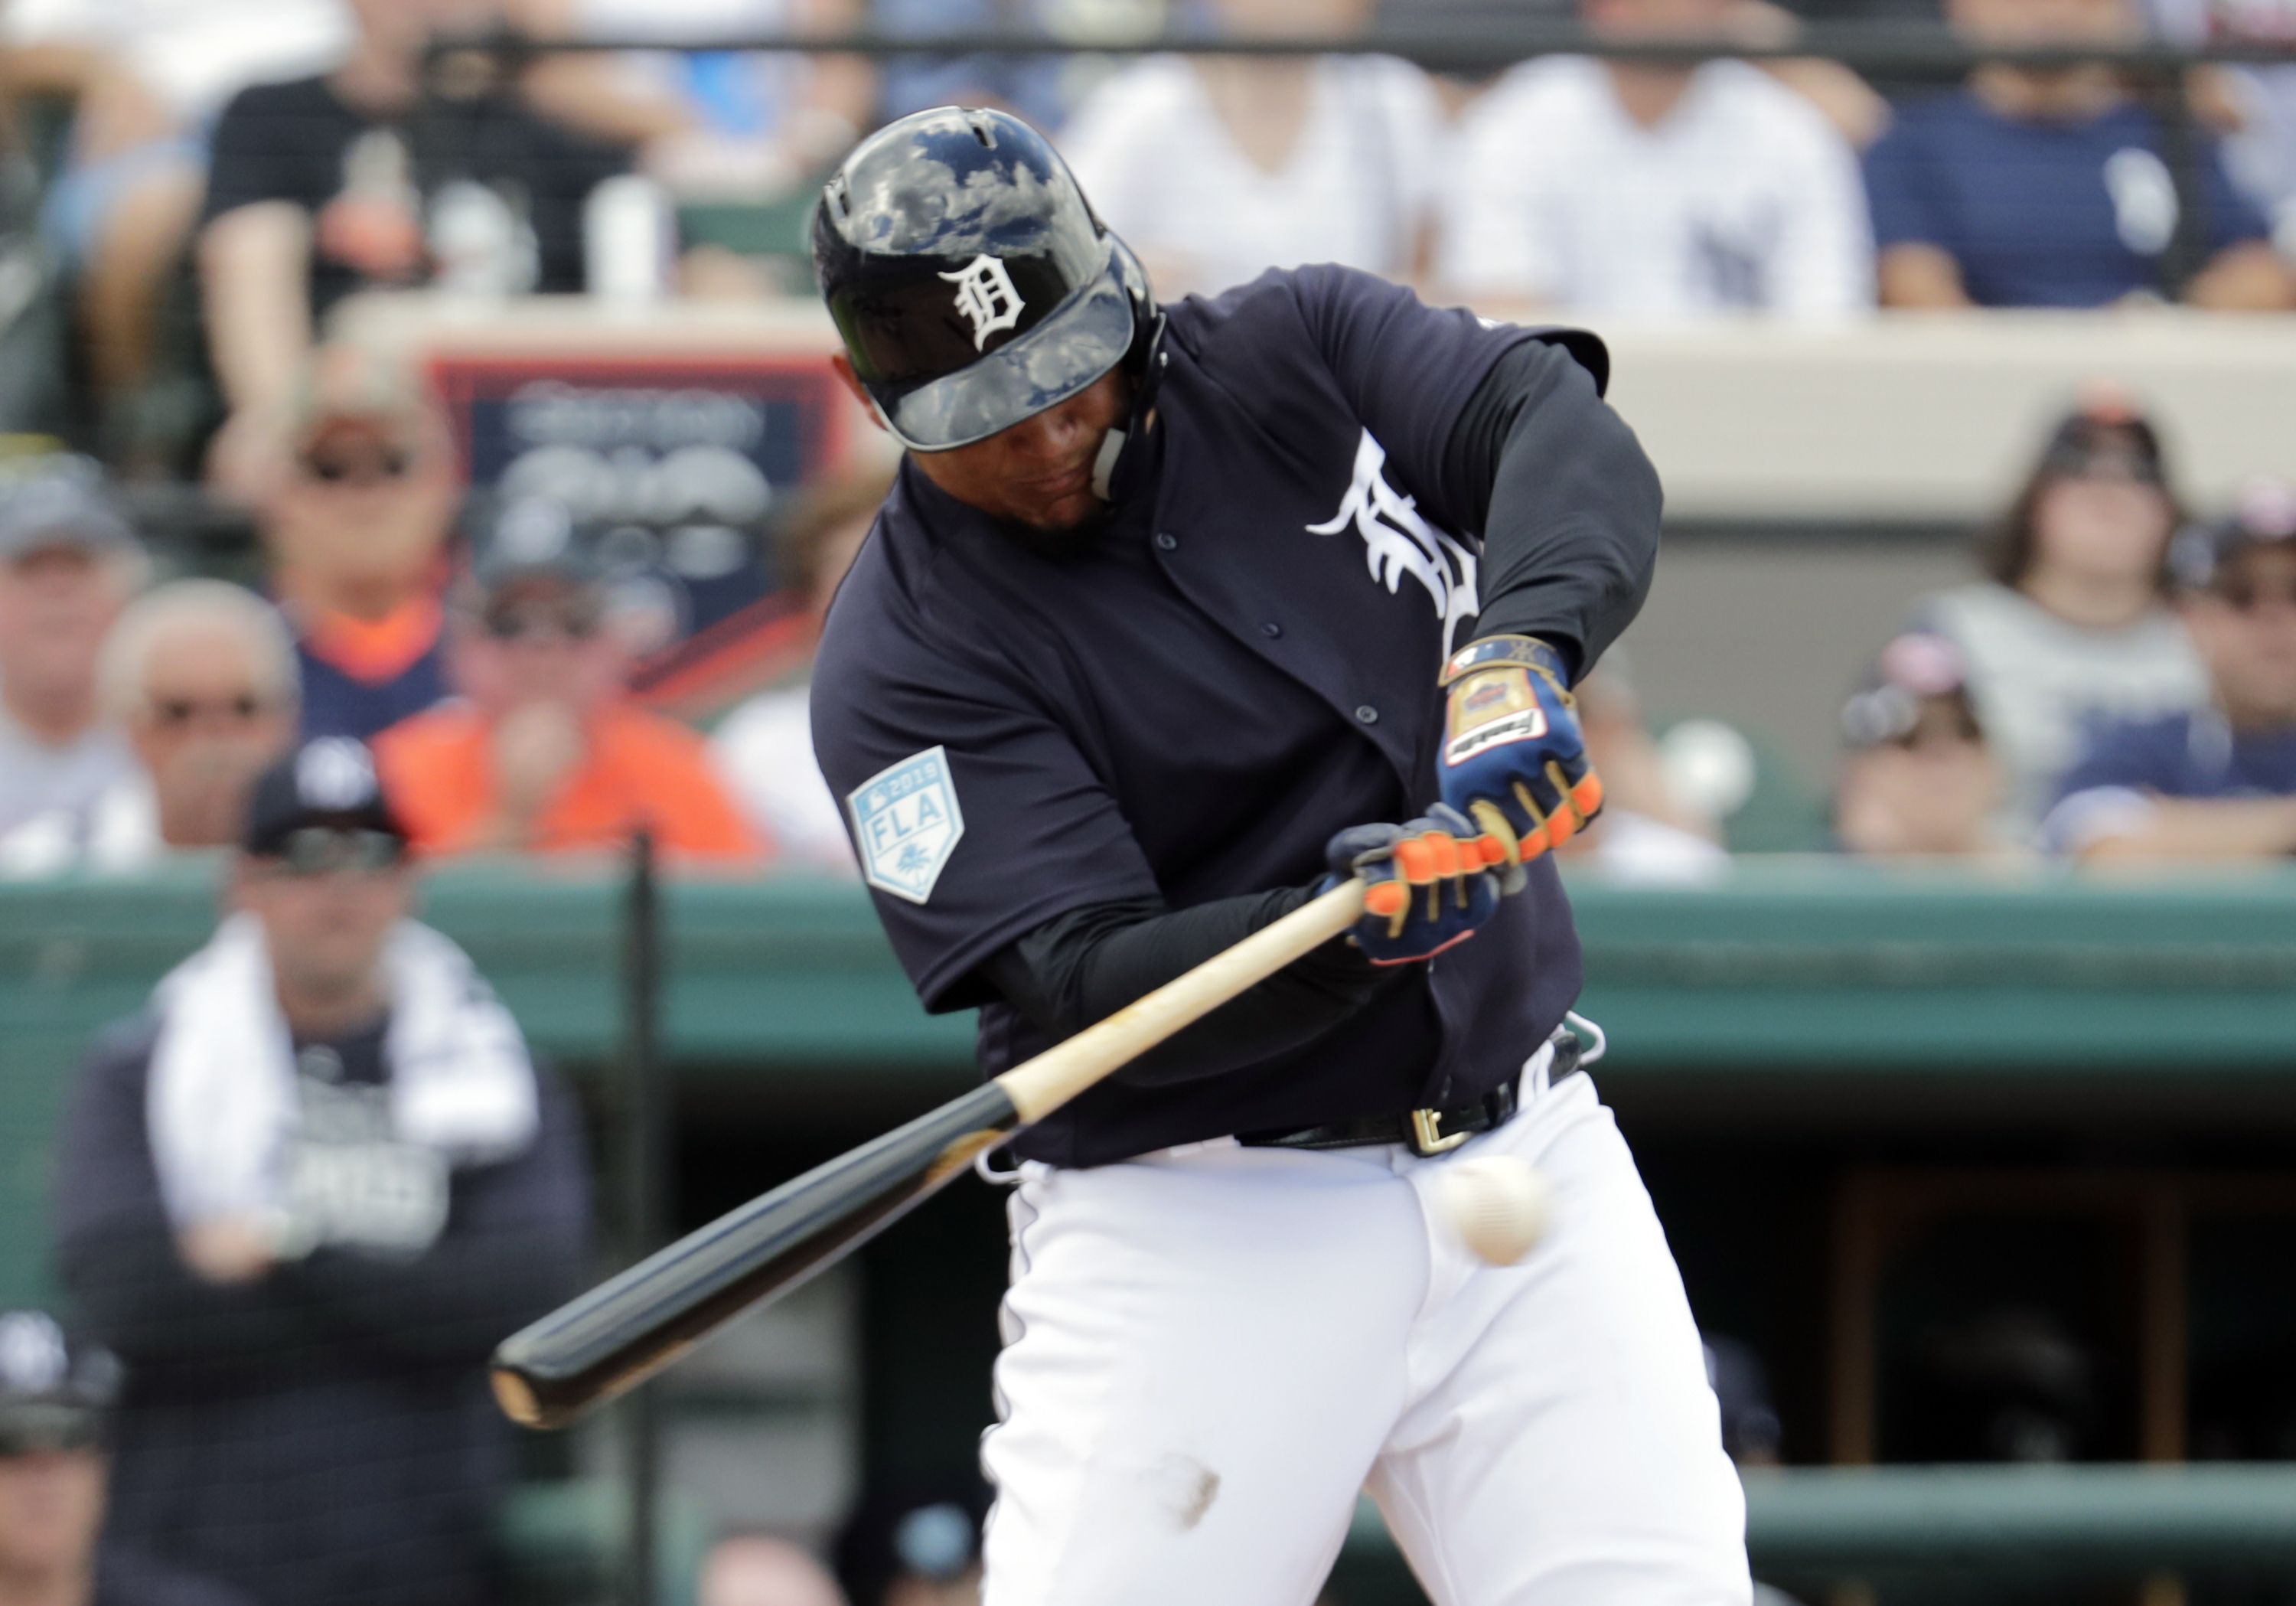 Cabrera looks healthy while hitting first homer of spring